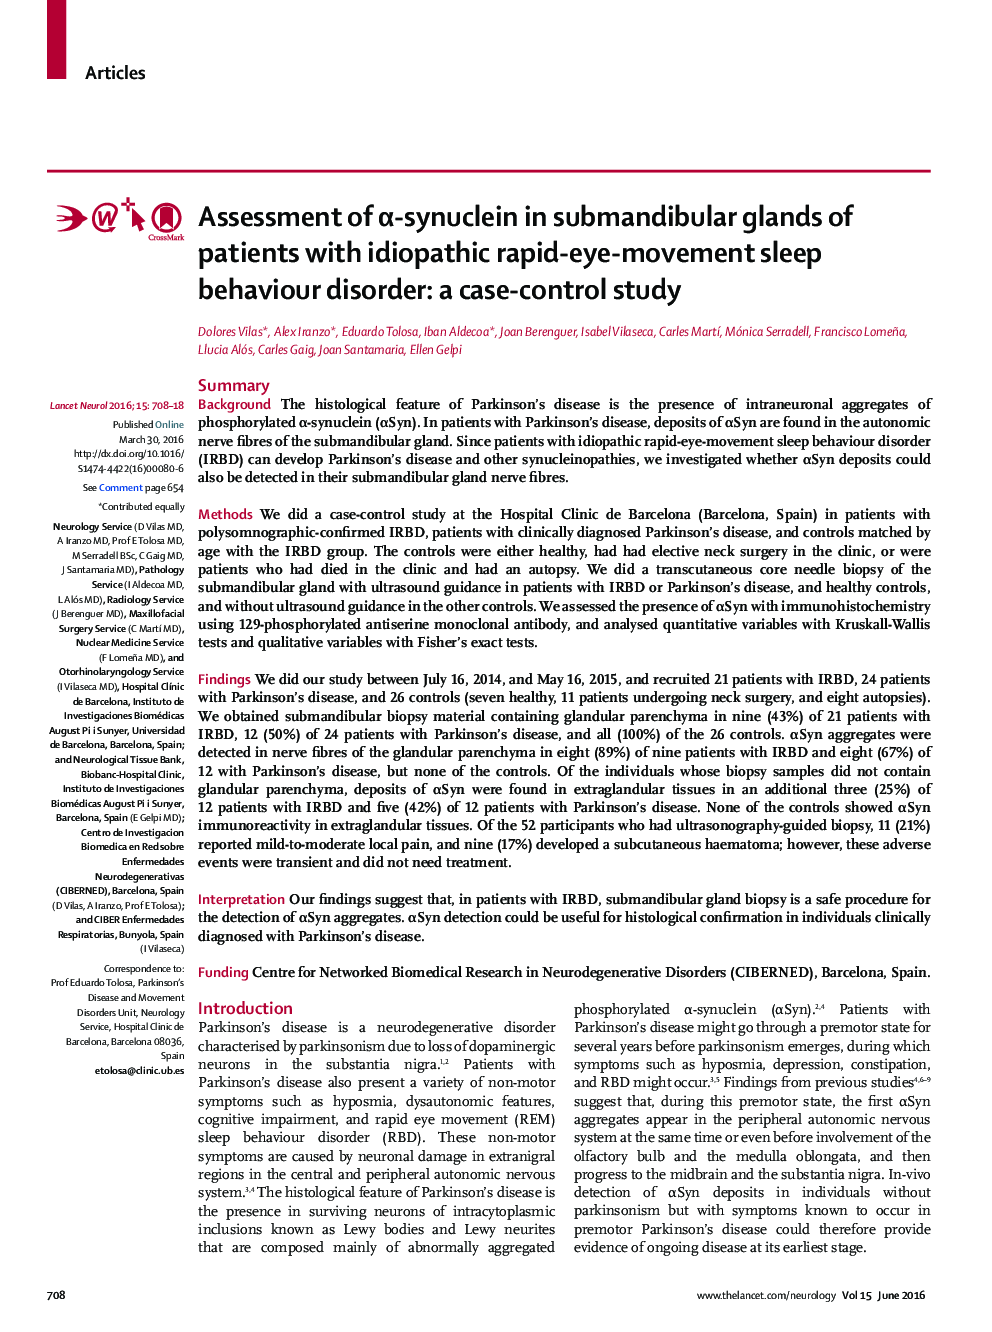 Assessment of α-synuclein in submandibular glands of patients with idiopathic rapid-eye-movement sleep behaviour disorder: a case-control study